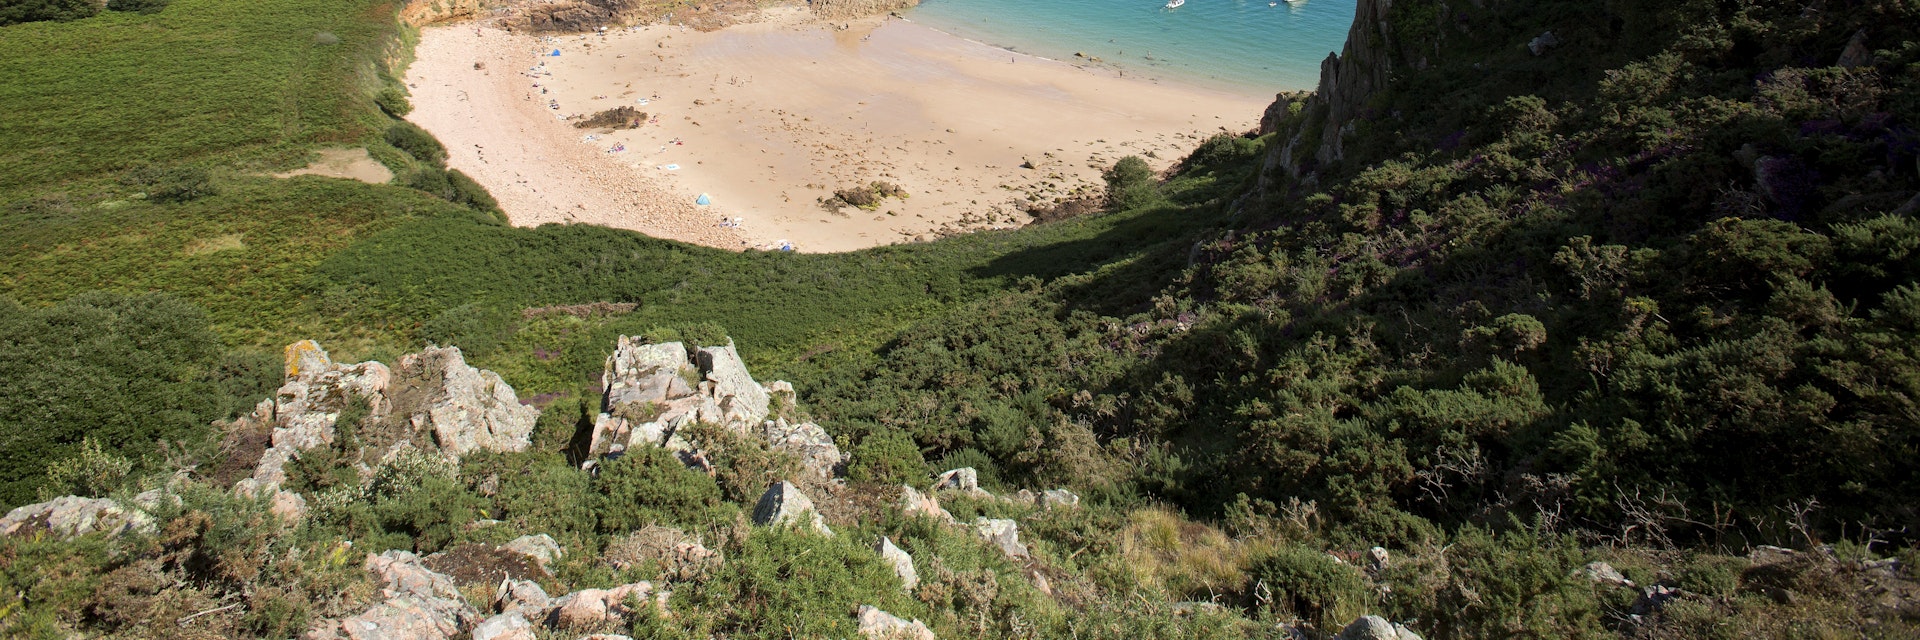 Overview of Beauport Bay on south coast of Jersey.